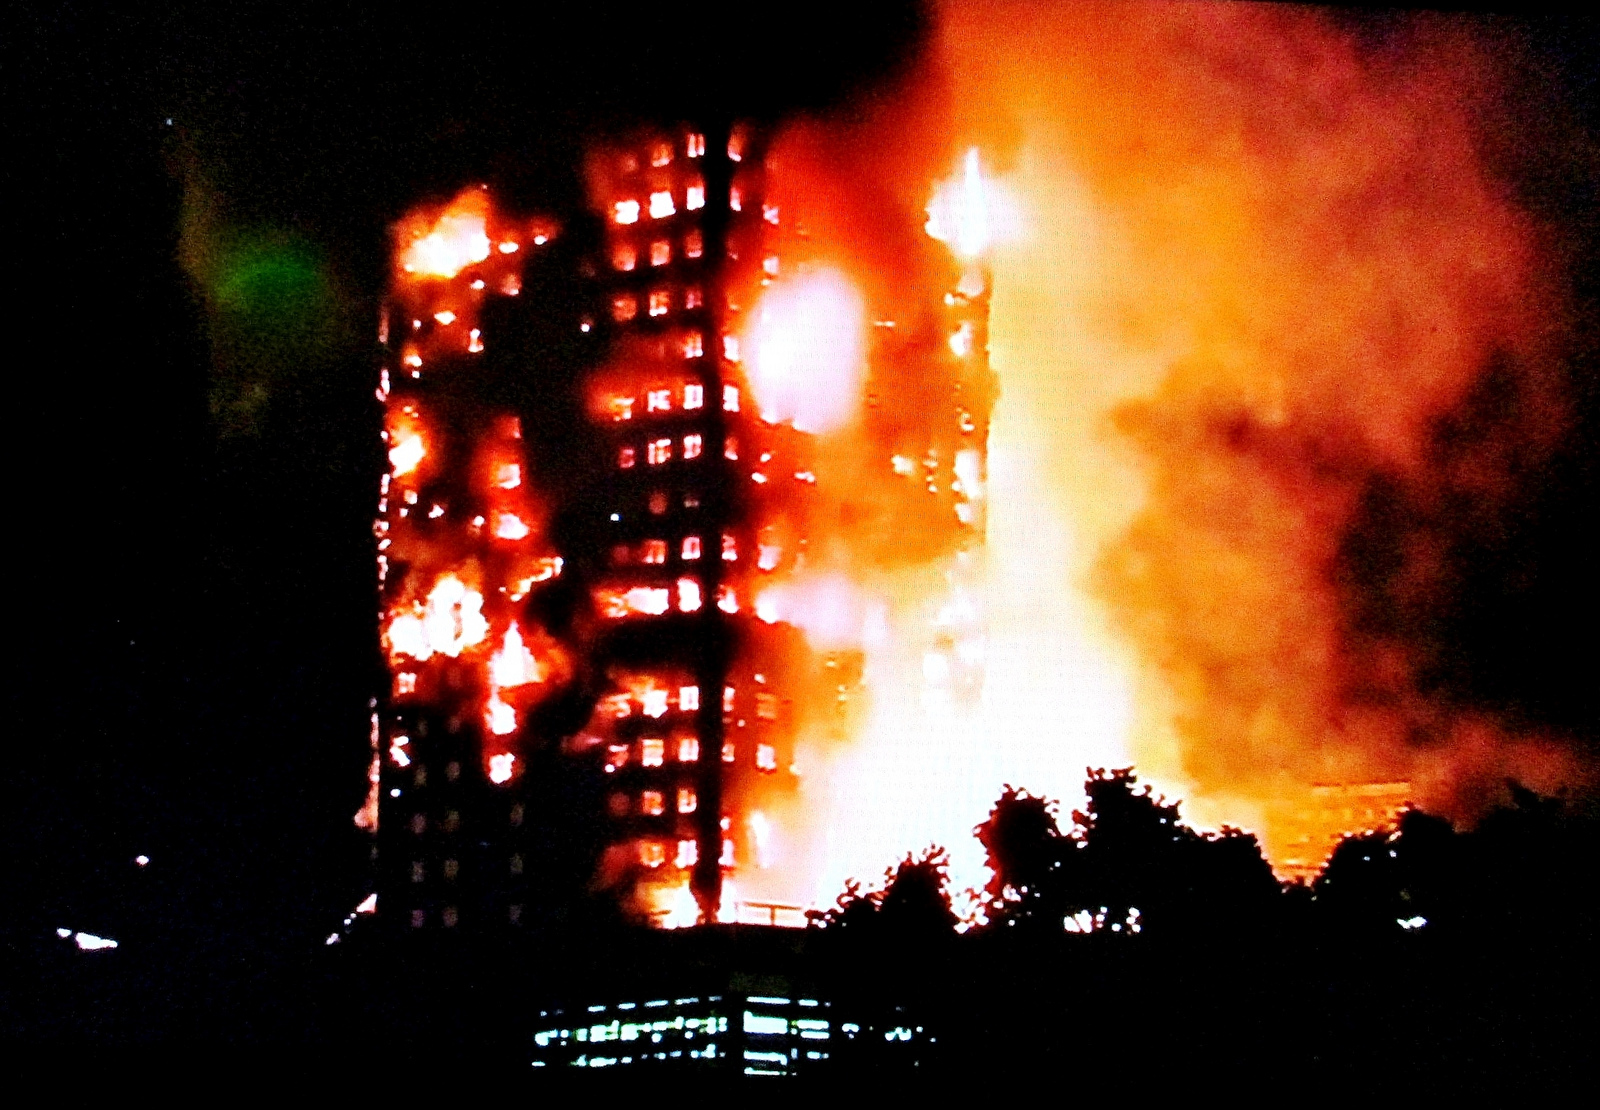 Remembering Grenfell: Who Are Our Cities For?